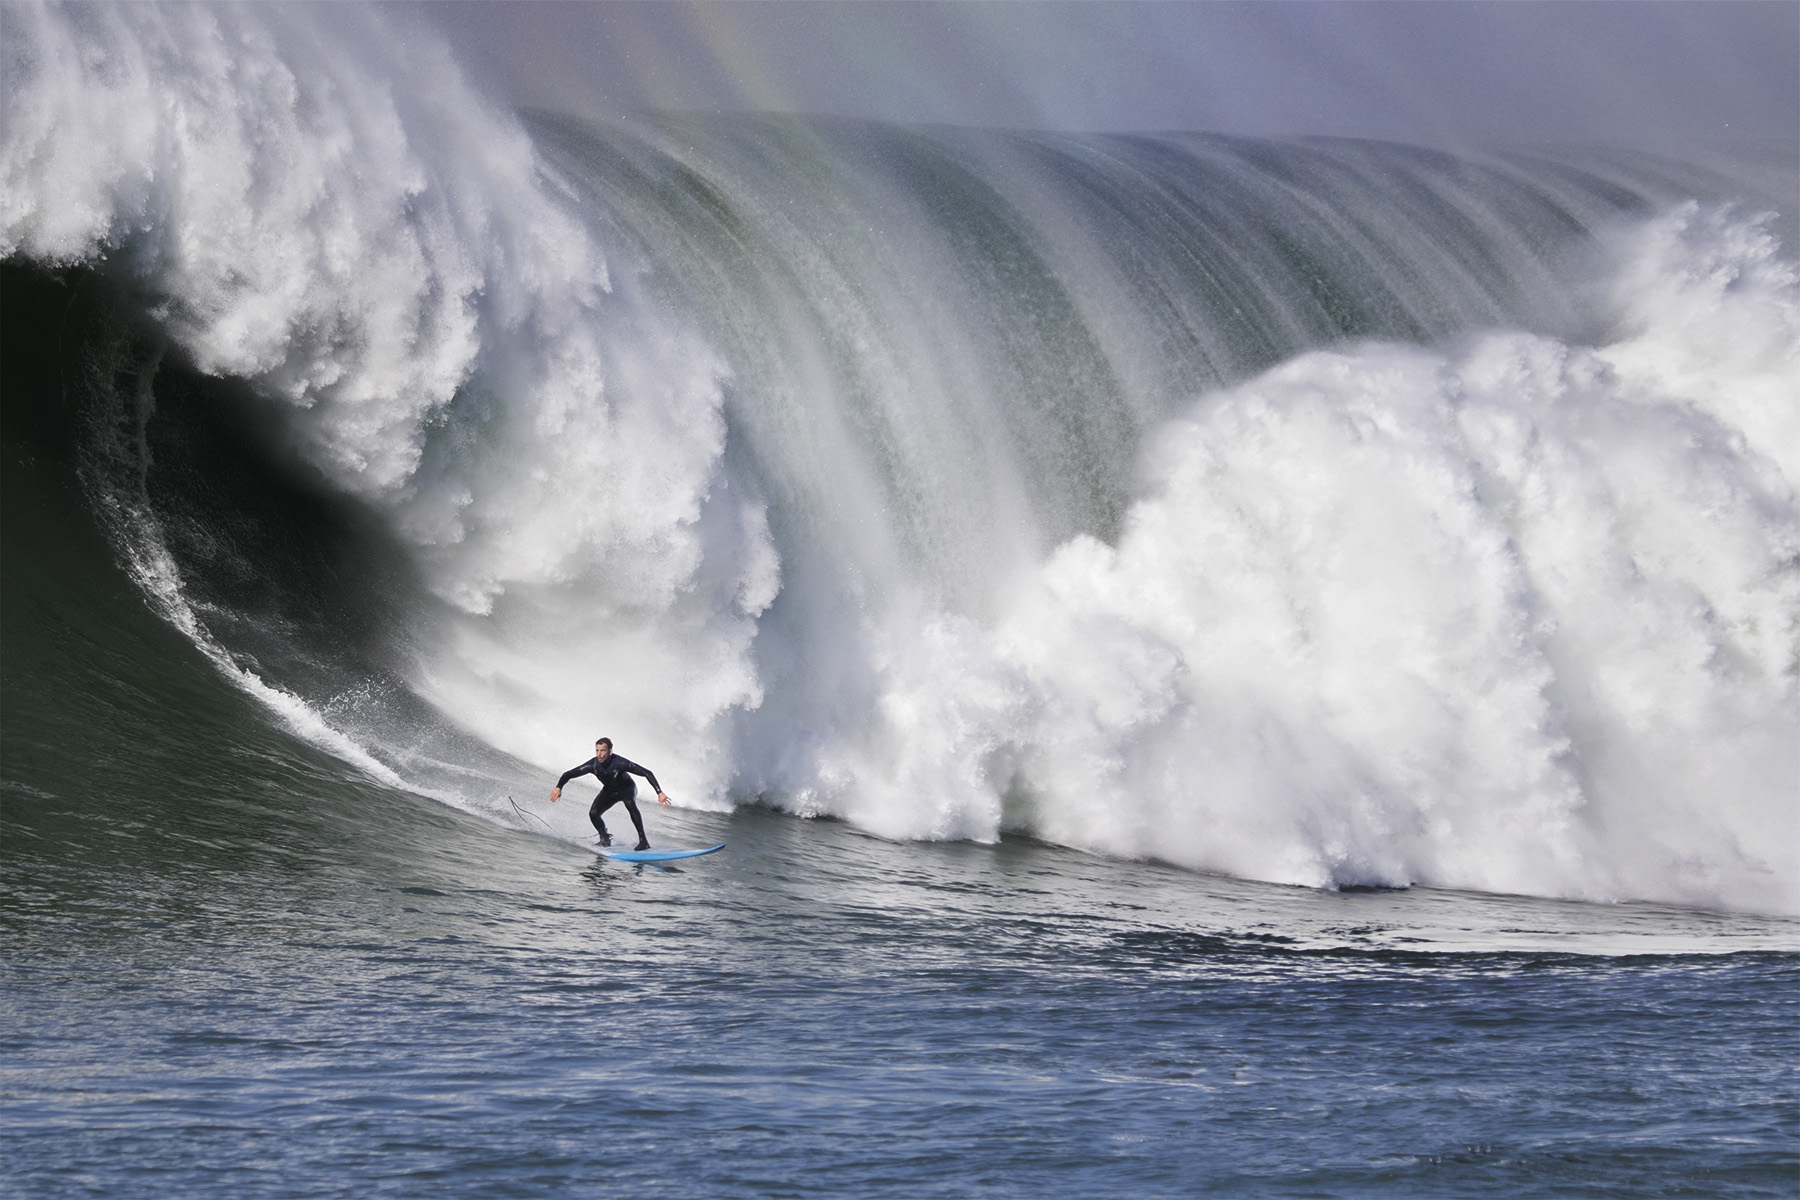 Person surfing in front of large breaking wave